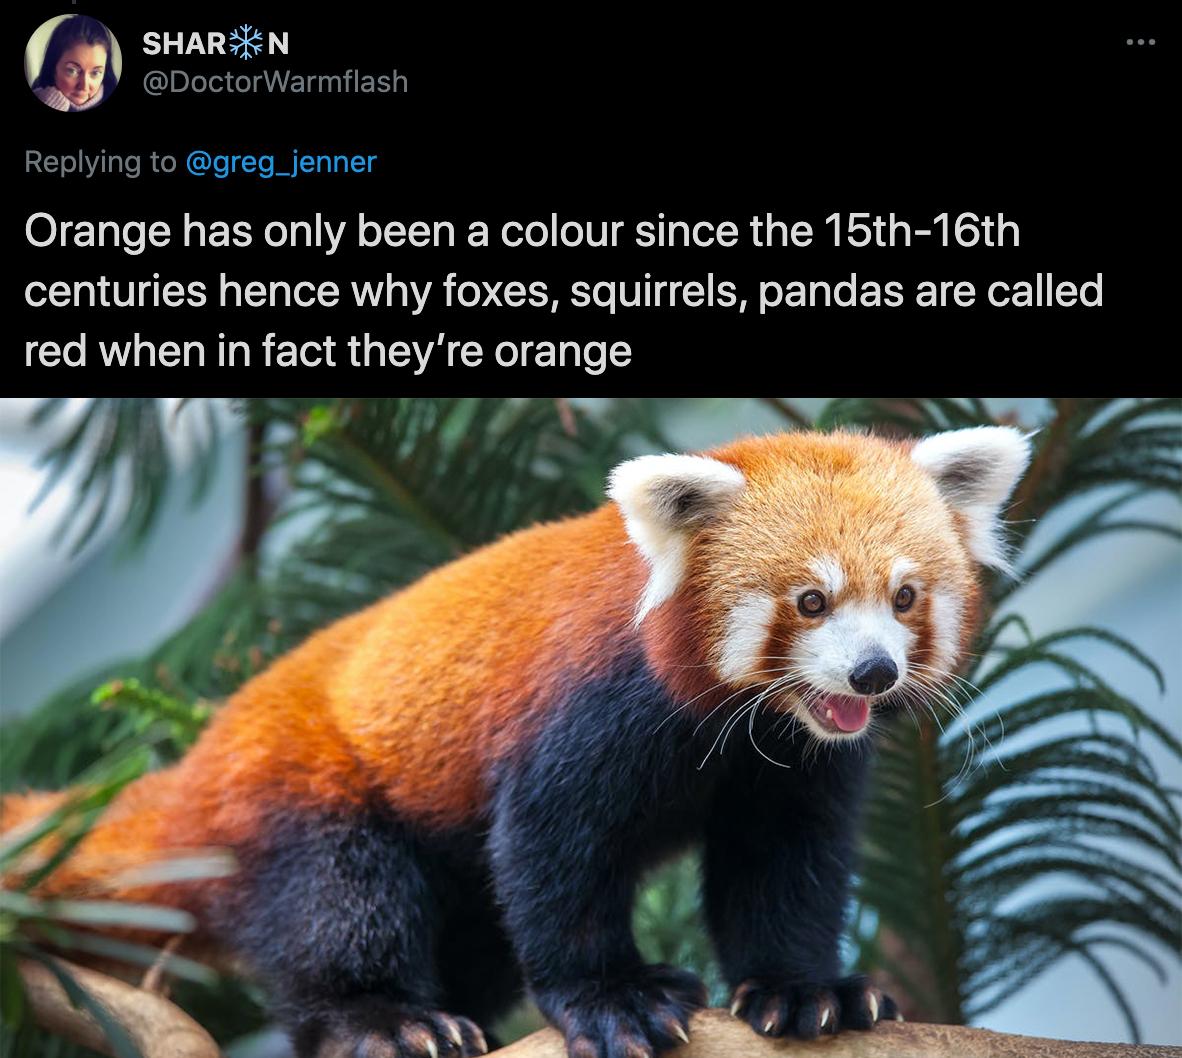 cool facts - Orange has only been a colour since the 15th 16th centuries hence why foxes, squirrels, pandas are called red when in fact they're orange